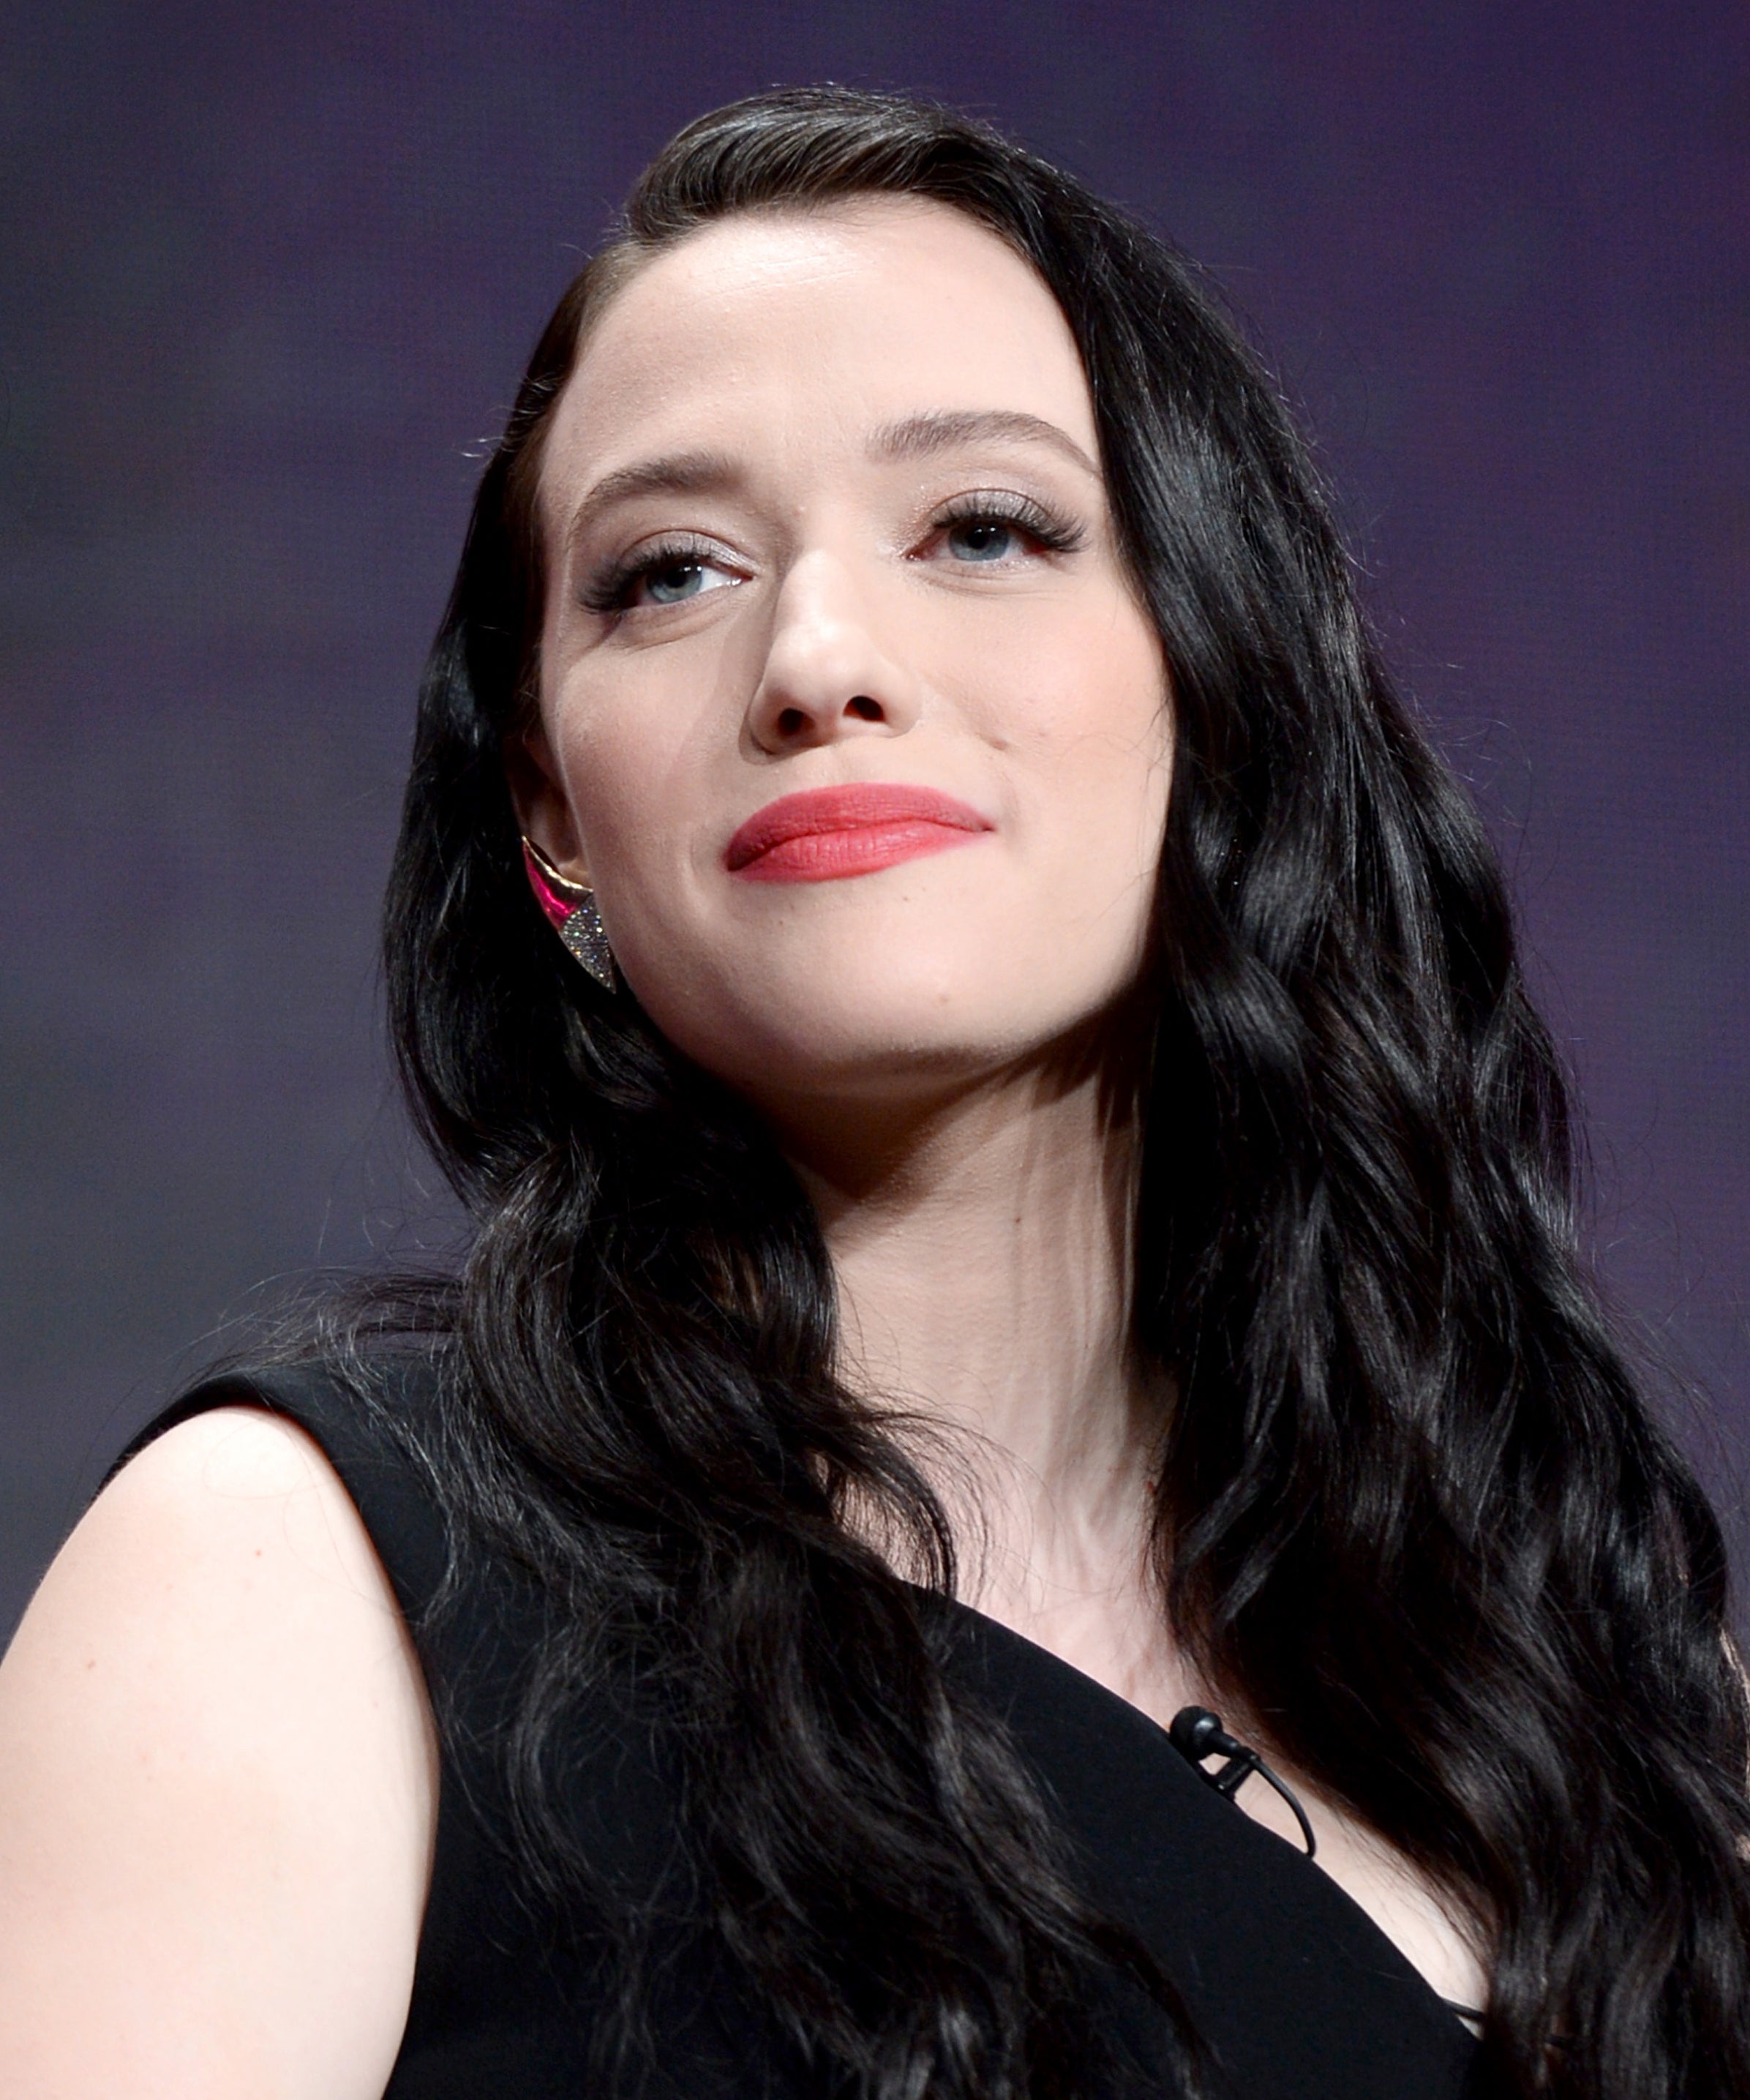 Kat Dennings’ Three-Stone Engagement Ring Is A Stunner